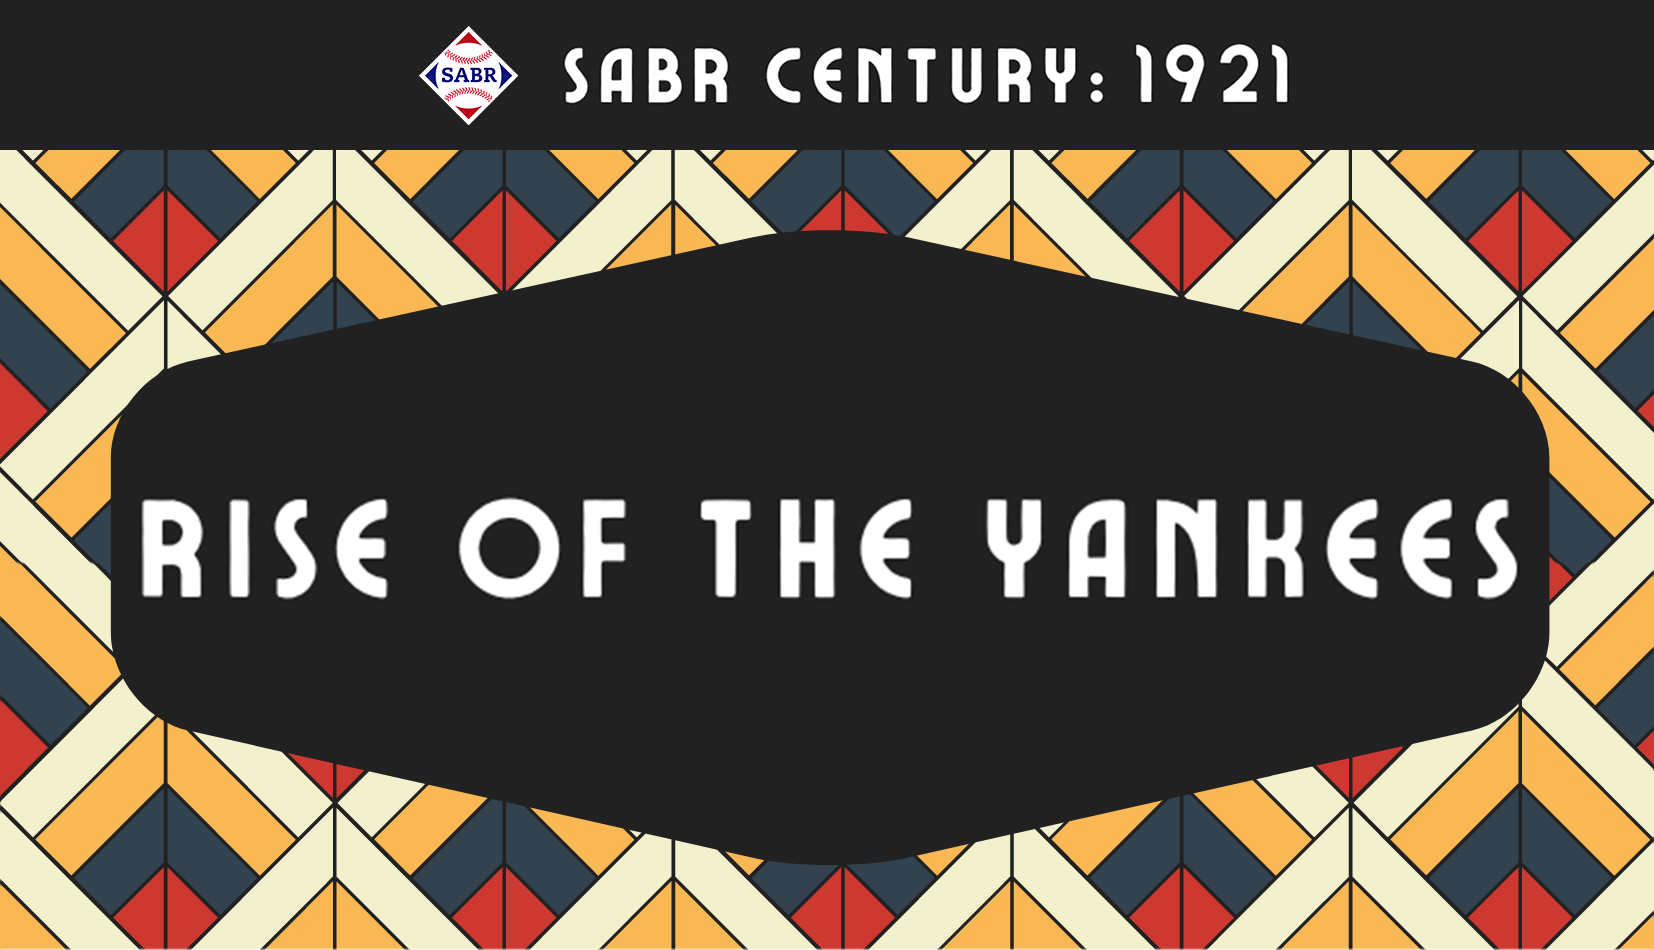 SABR Century: Rise of the Yankees